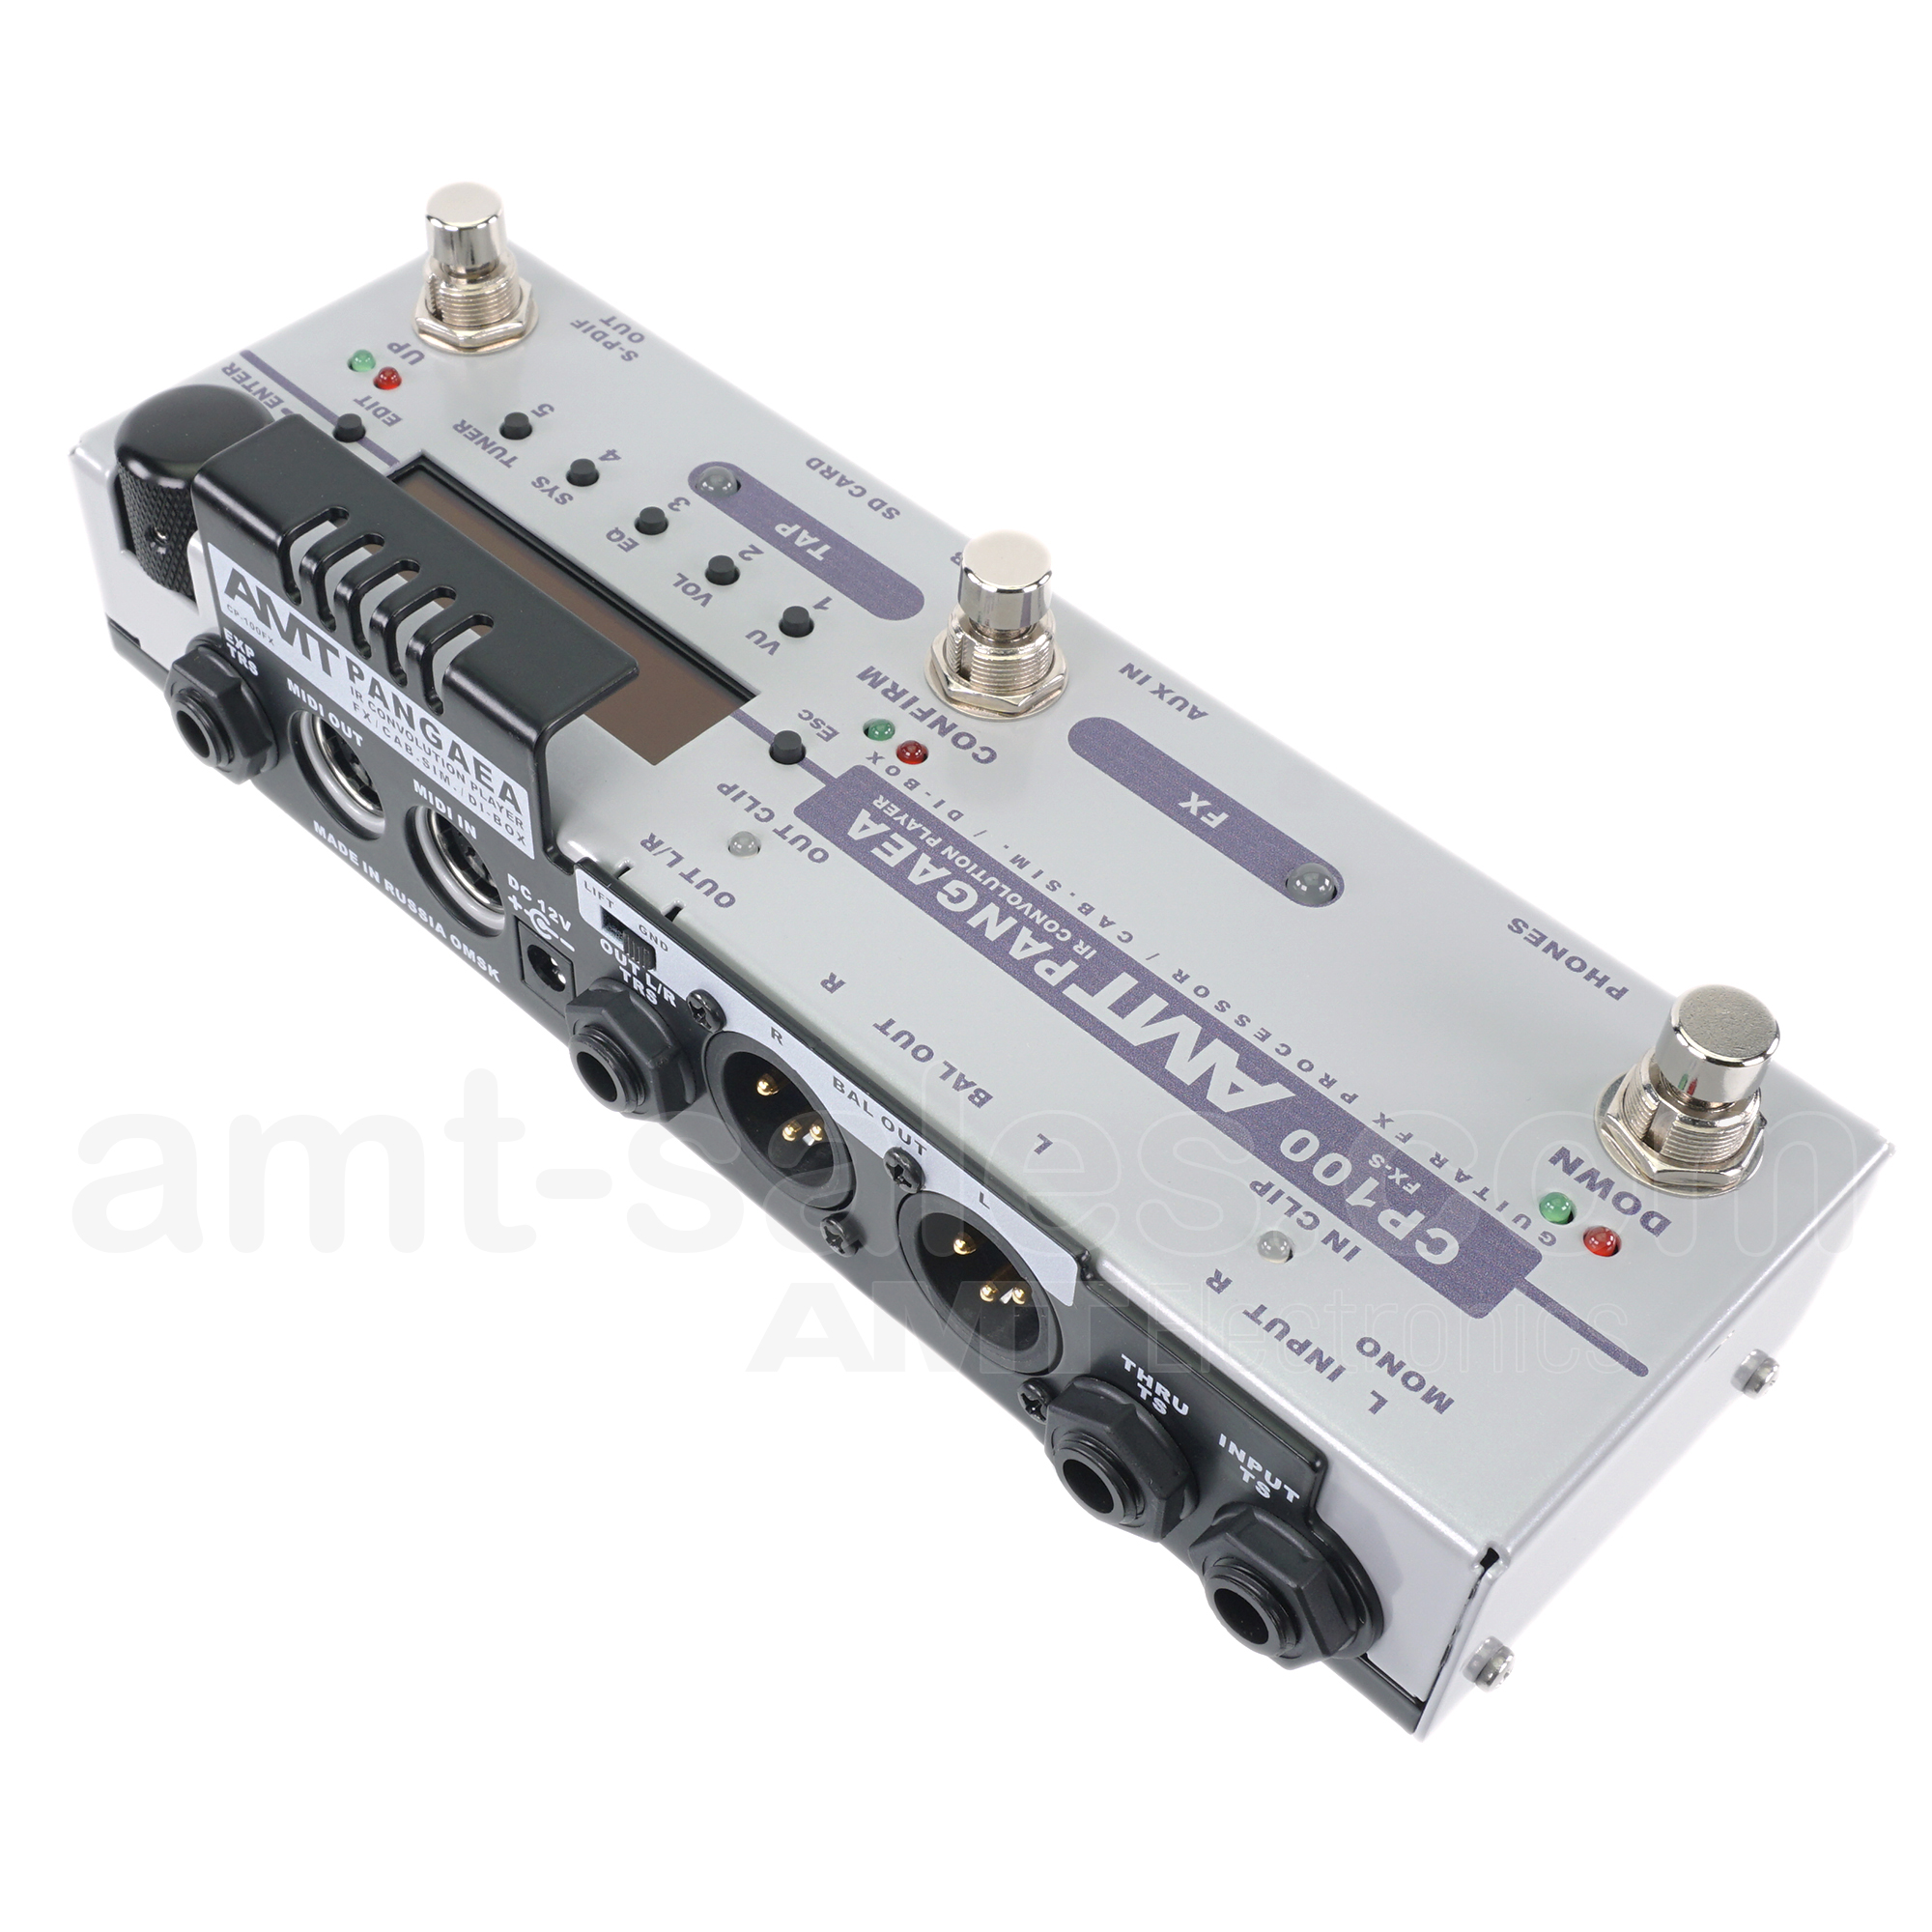 AMT PANGAEA CP-100FX-S (stereo) - IR Convolution Player & Effect processo